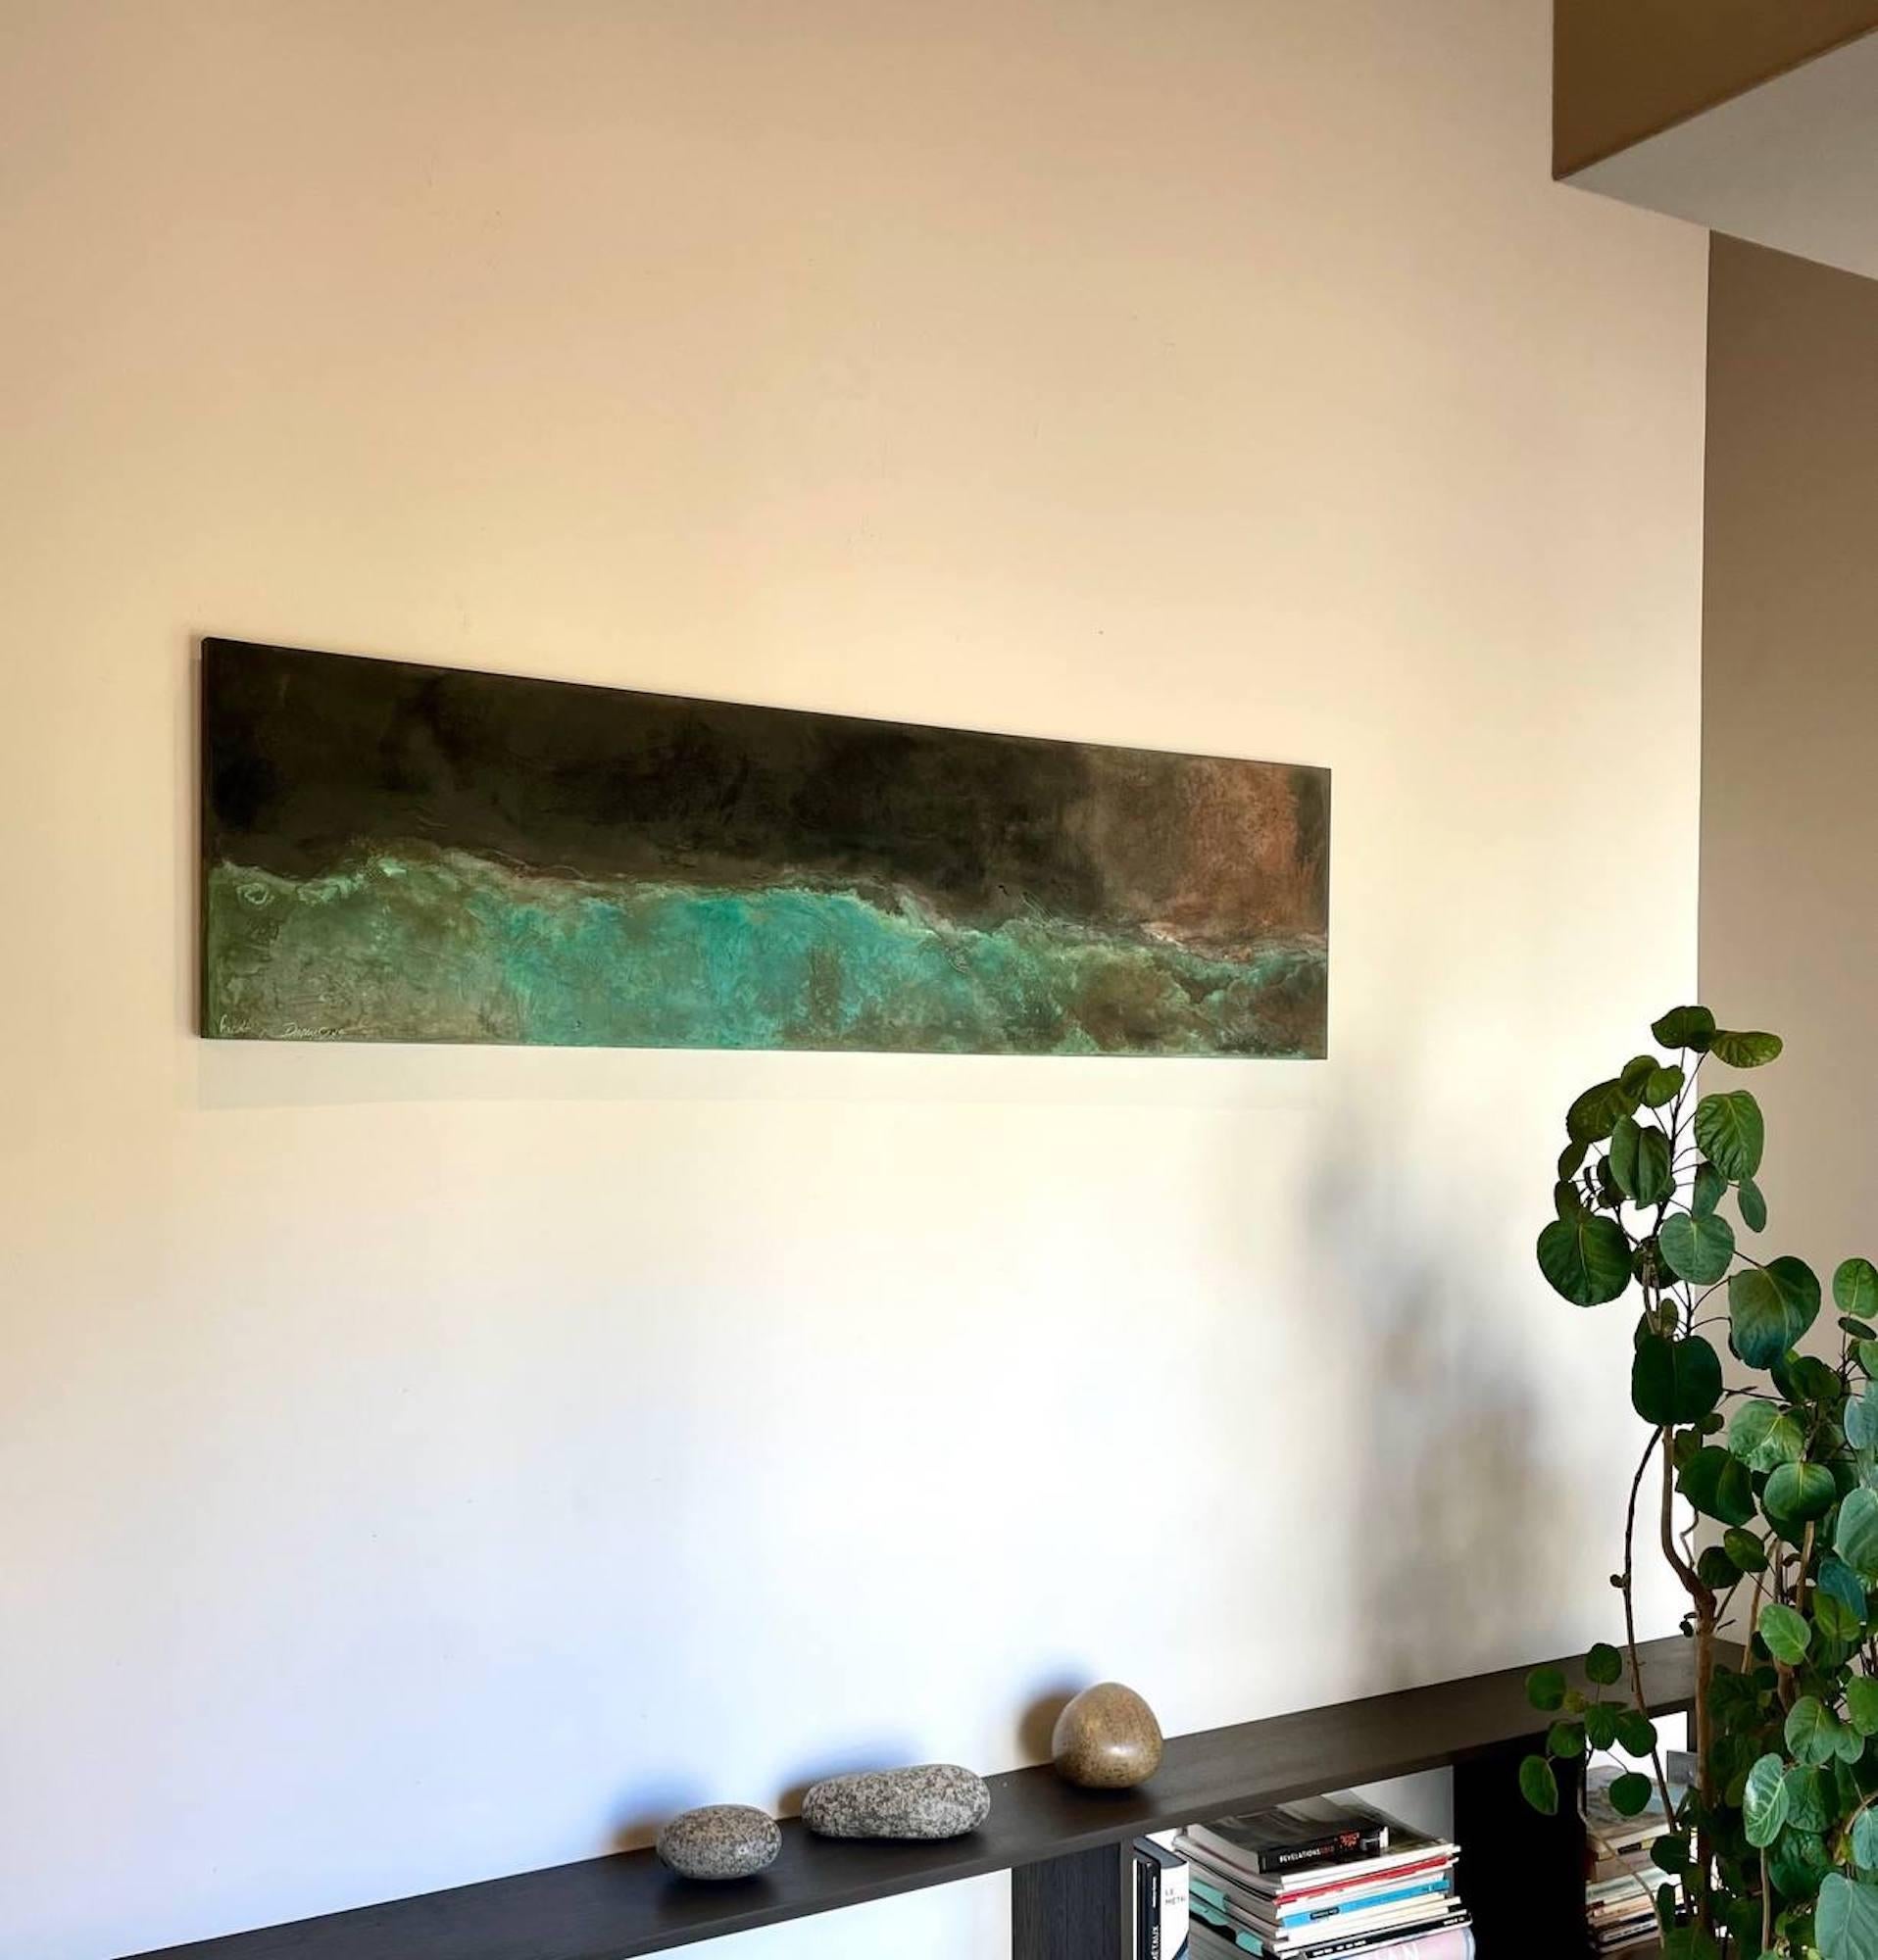 The Earth is round II by Frédérique Domergue - Abstract painting on metal, sea For Sale 2